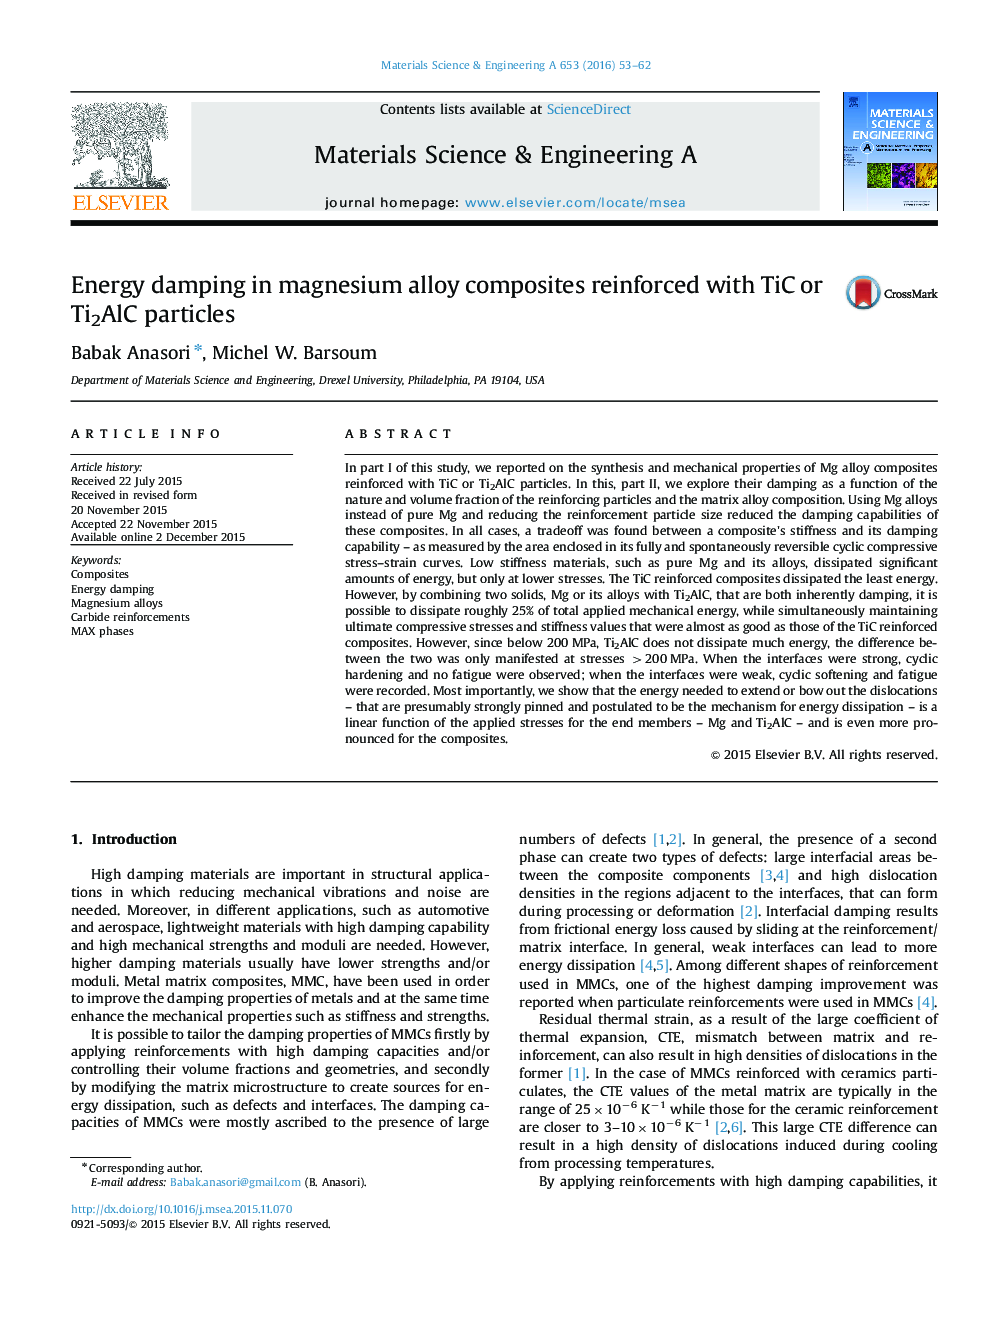 Energy damping in magnesium alloy composites reinforced with TiC or Ti2AlC particles